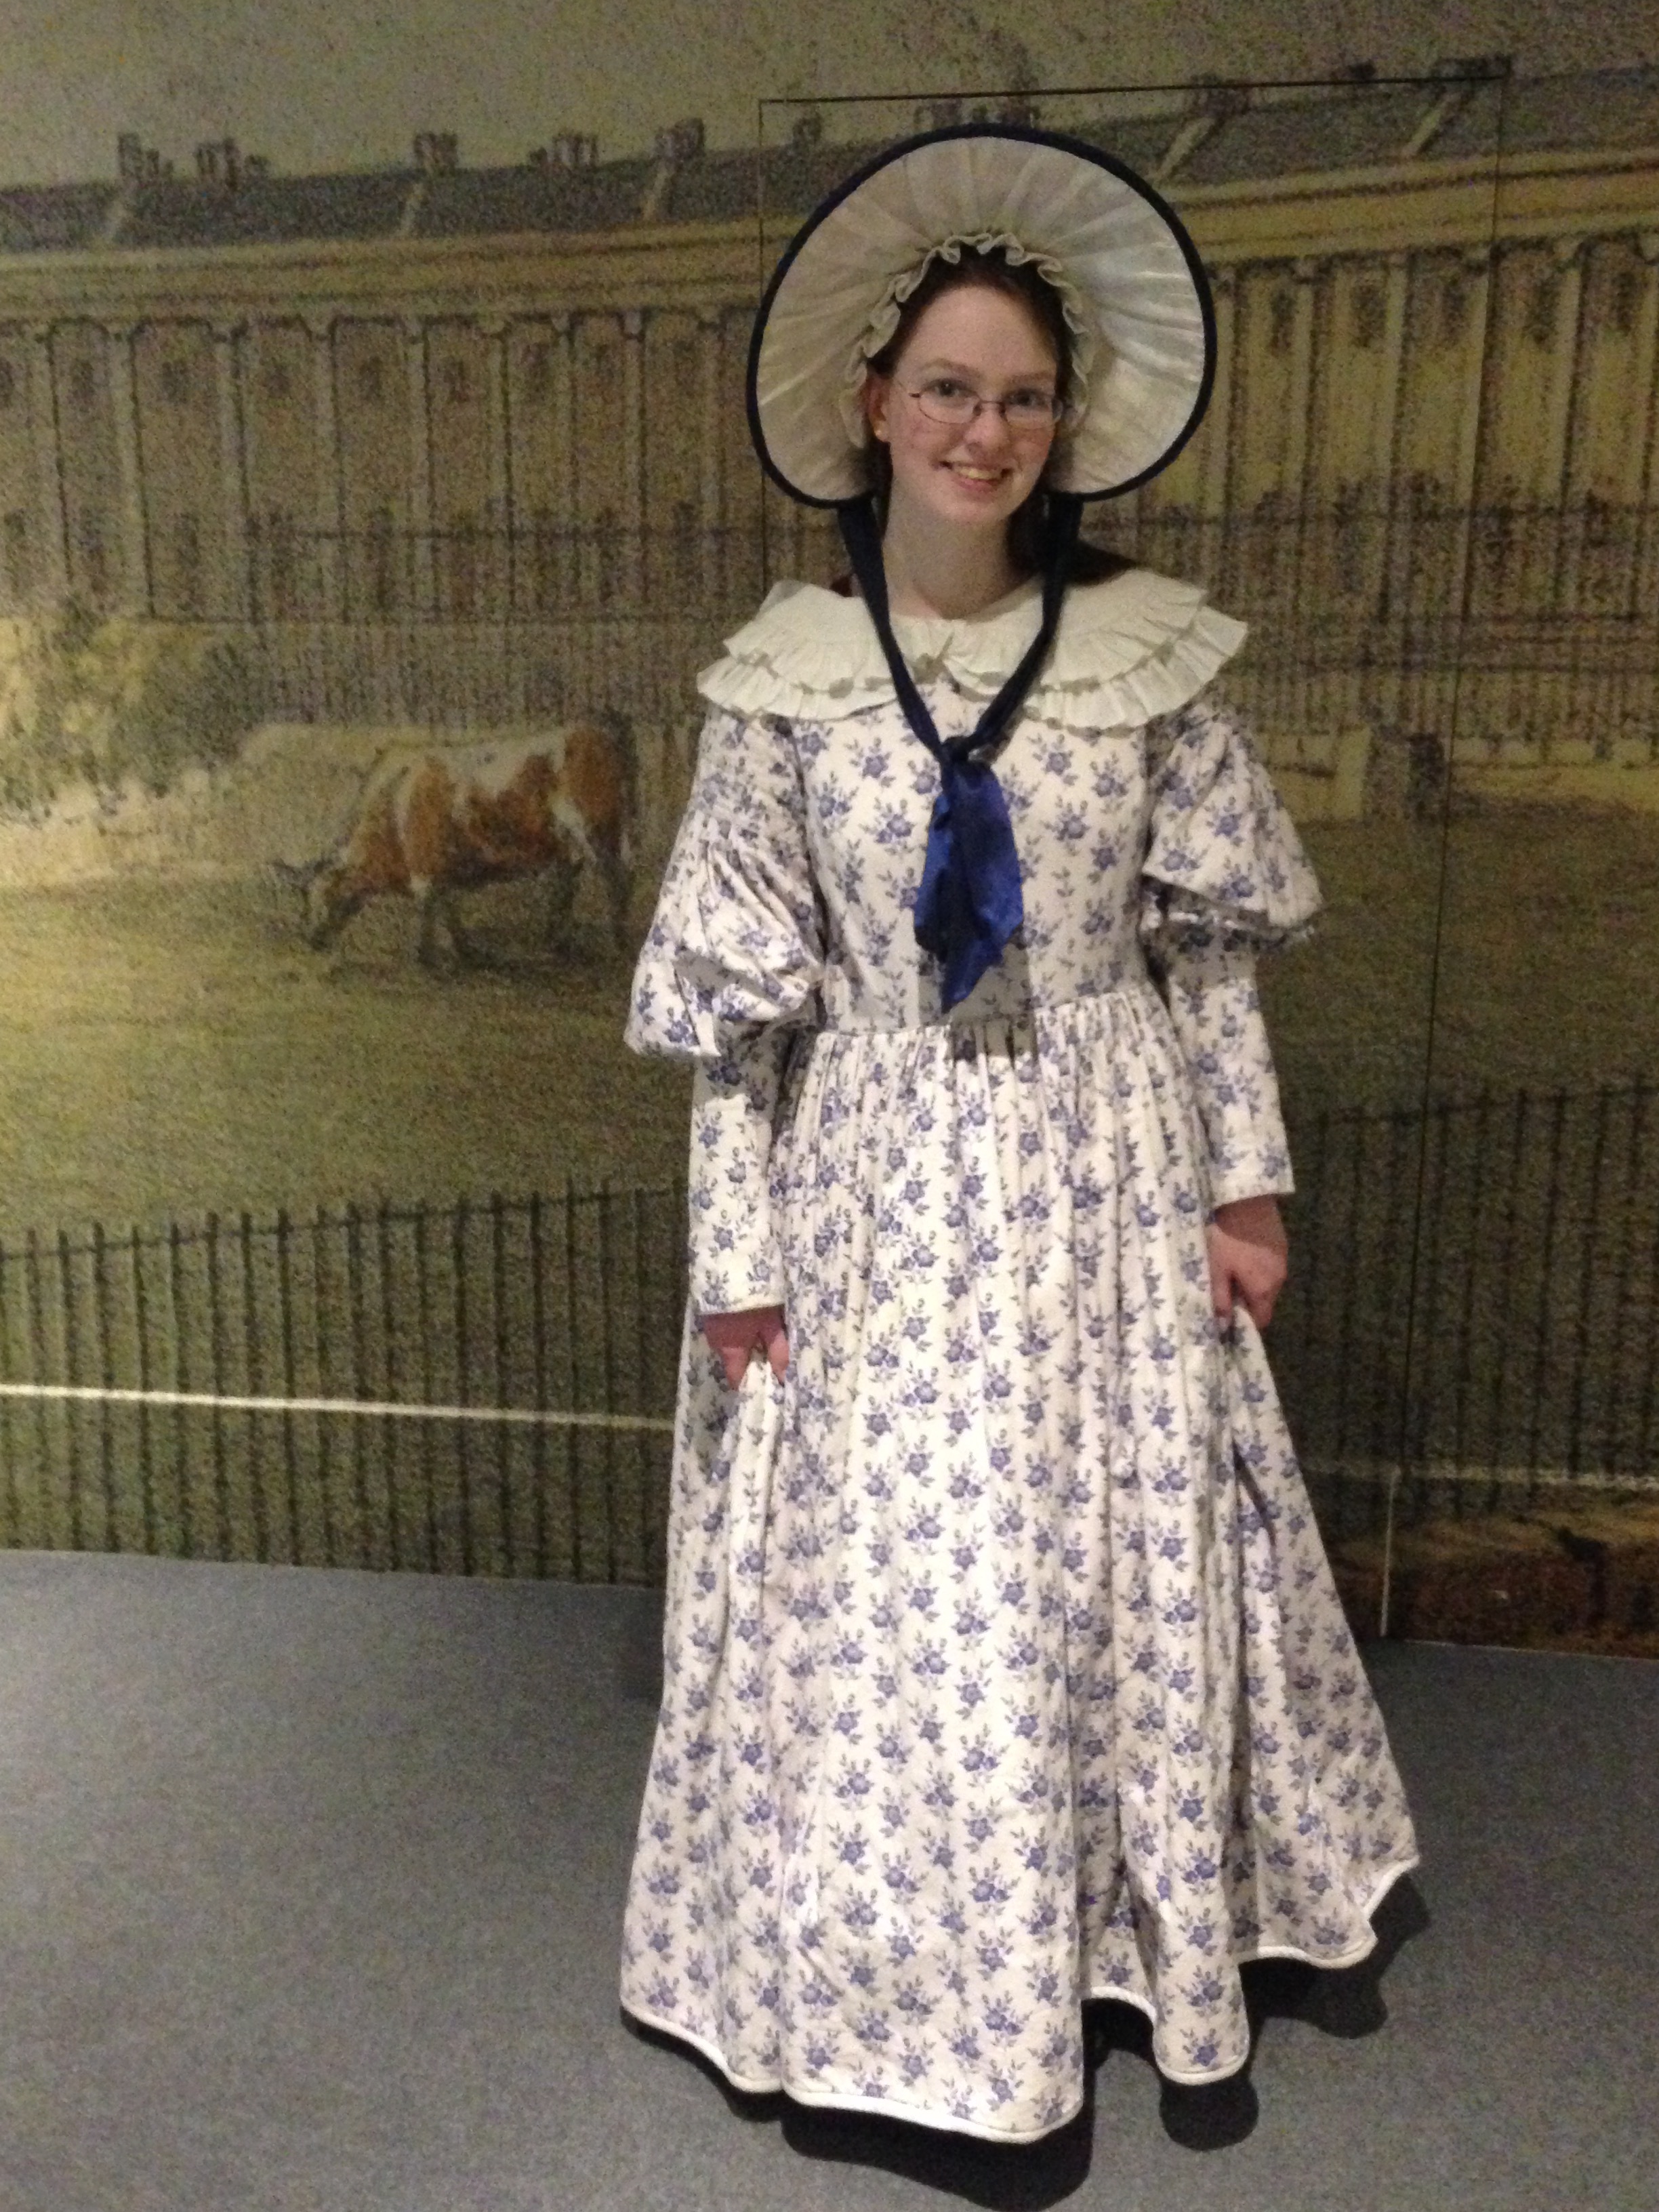  Me in a 19th-century dress and bonnet. 